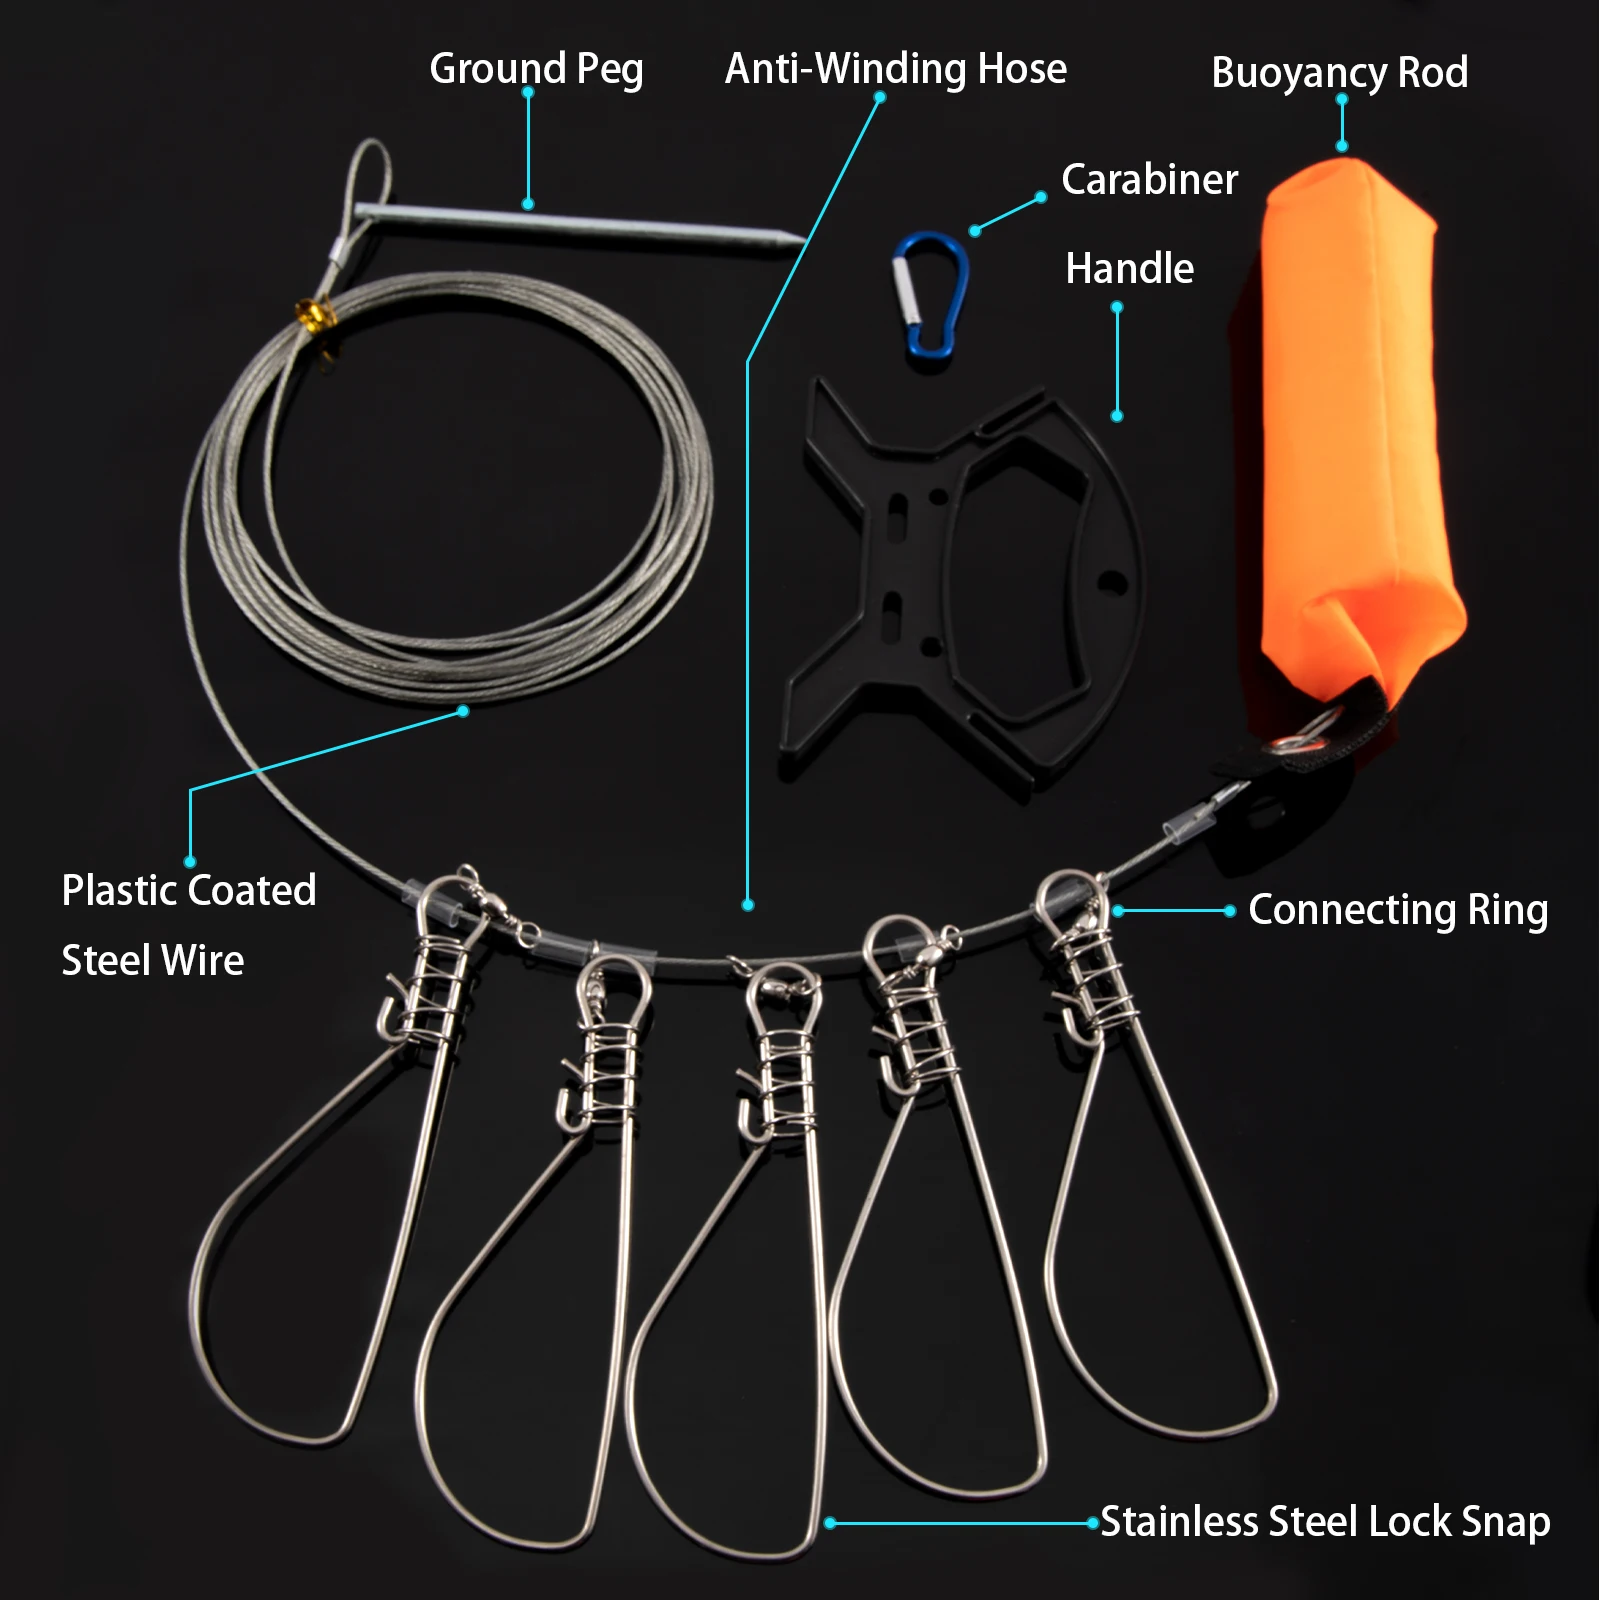 Goture Fishing Stringer Live Fish Lock Stainless Steel Fish